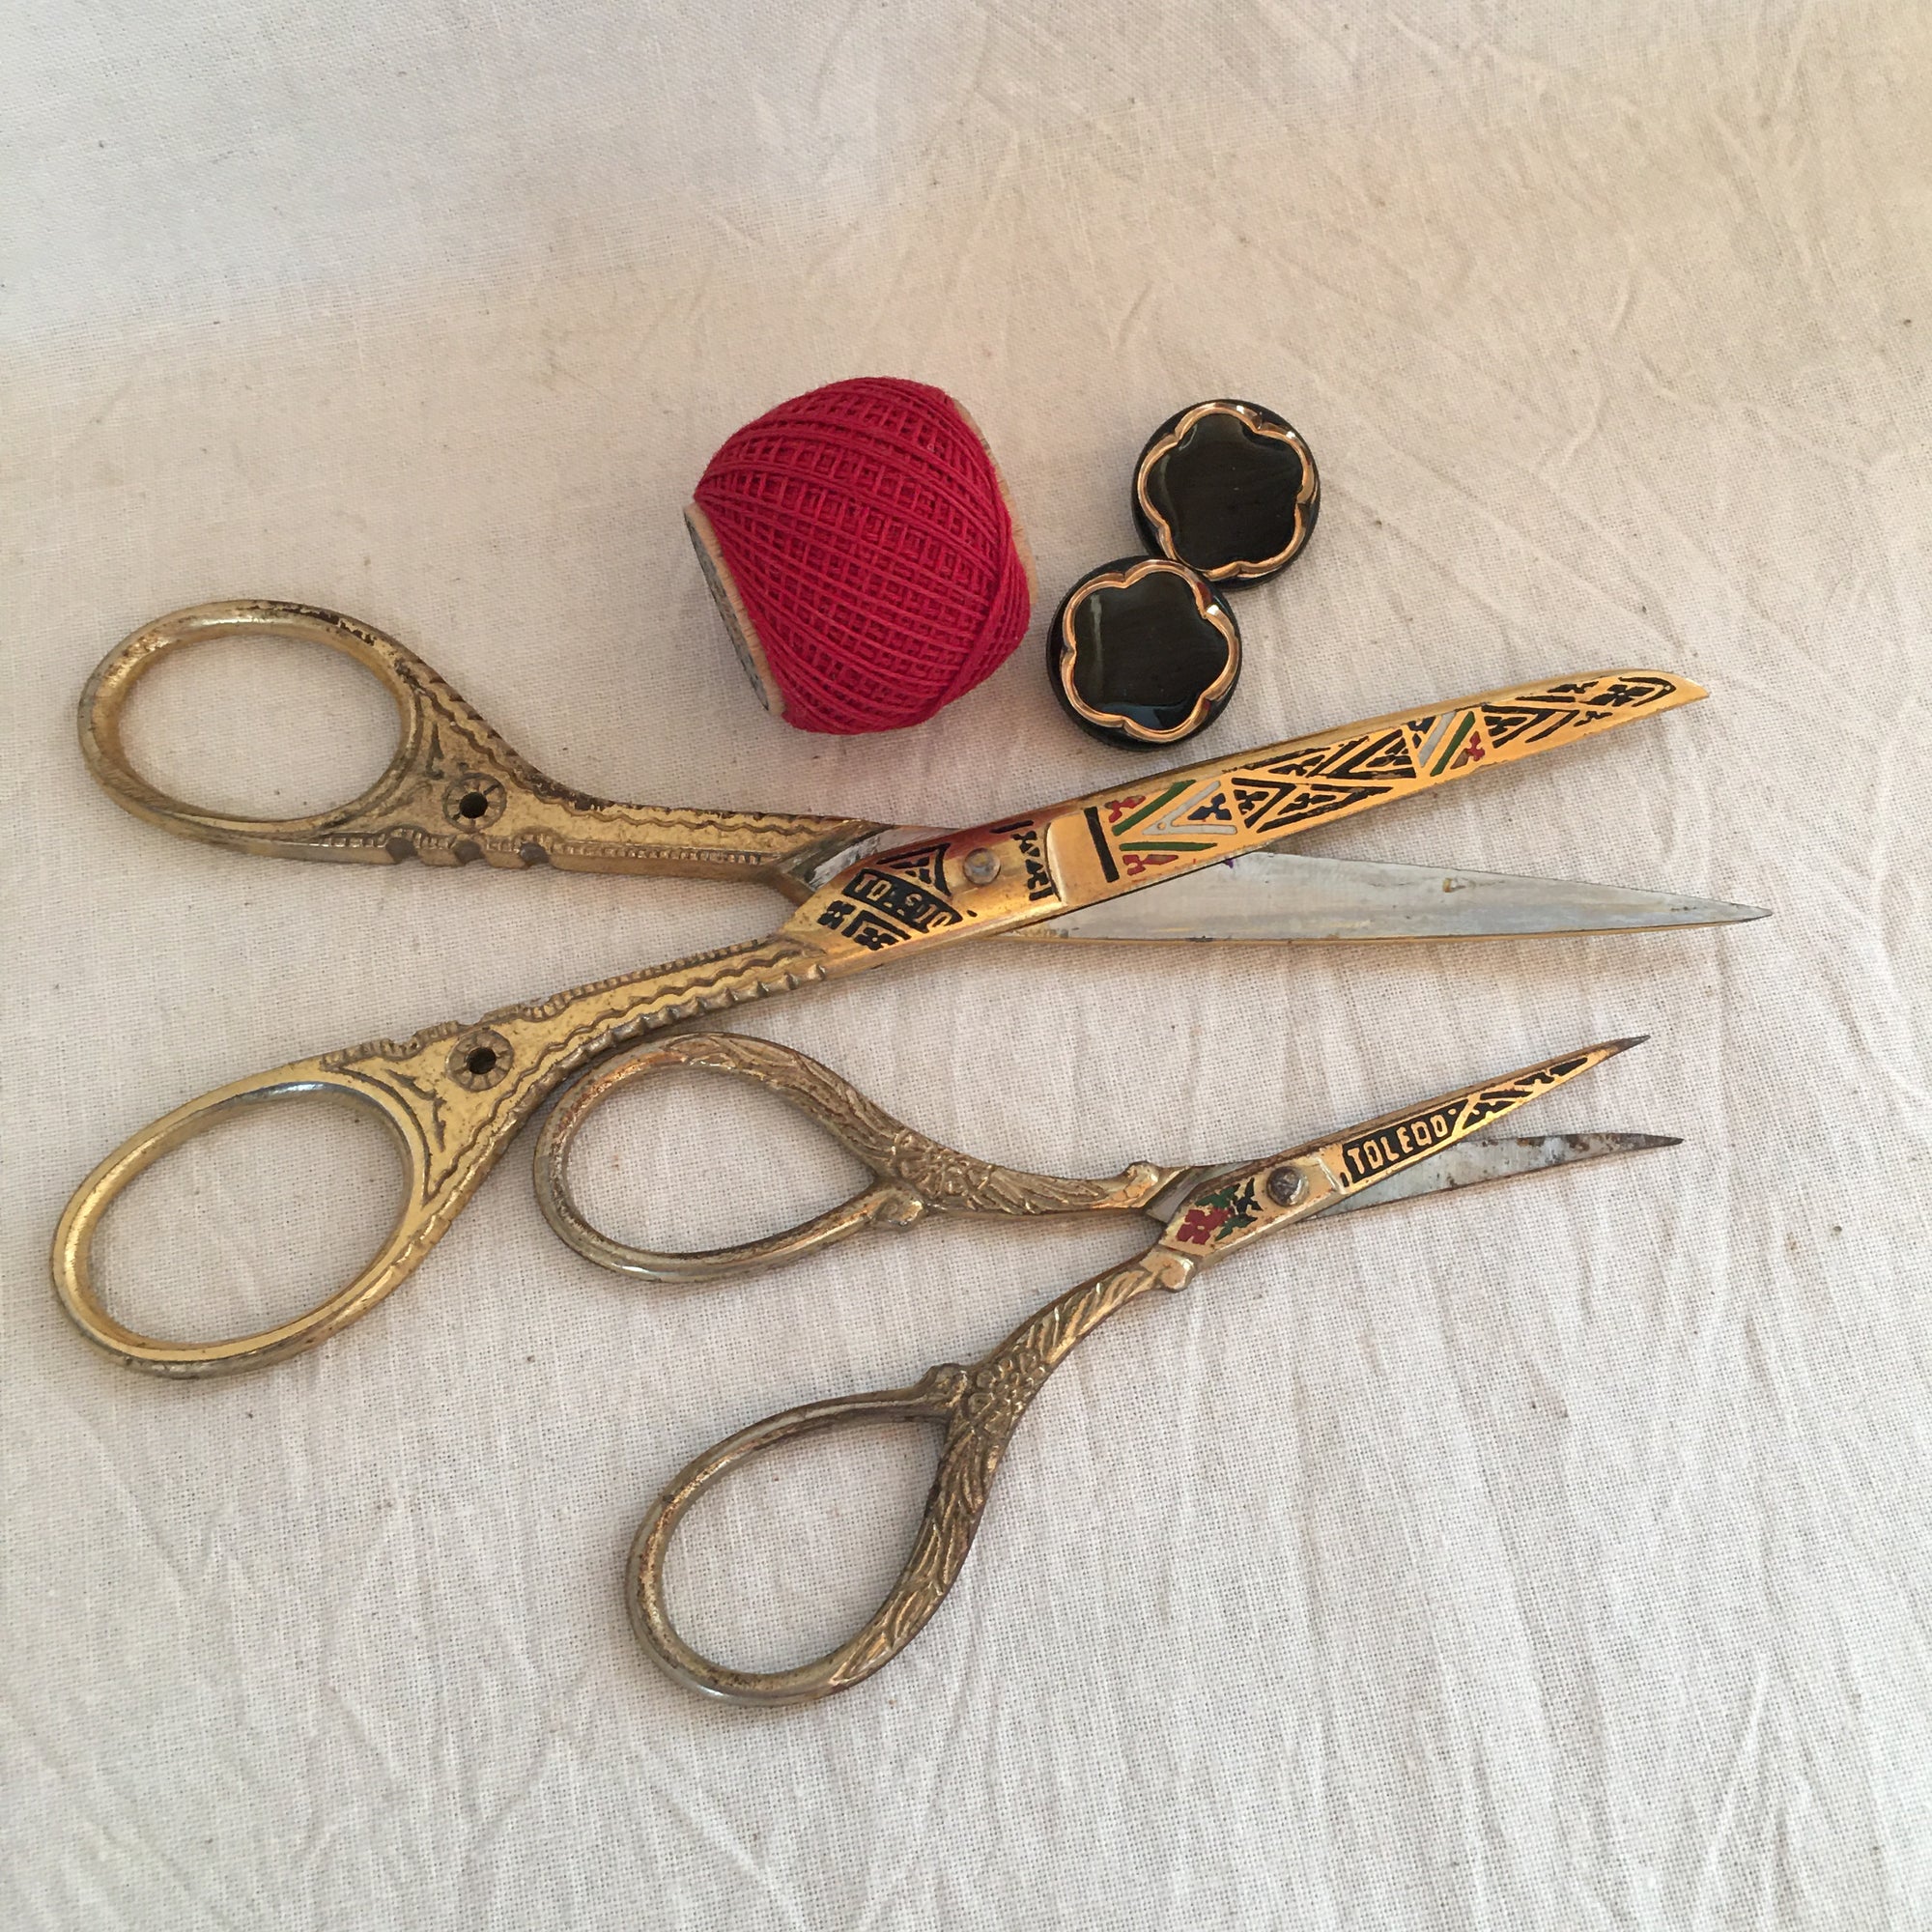 Set of Two Vintage Gold Tone and Enamel Sewing Scissors, Marked “Toledo”